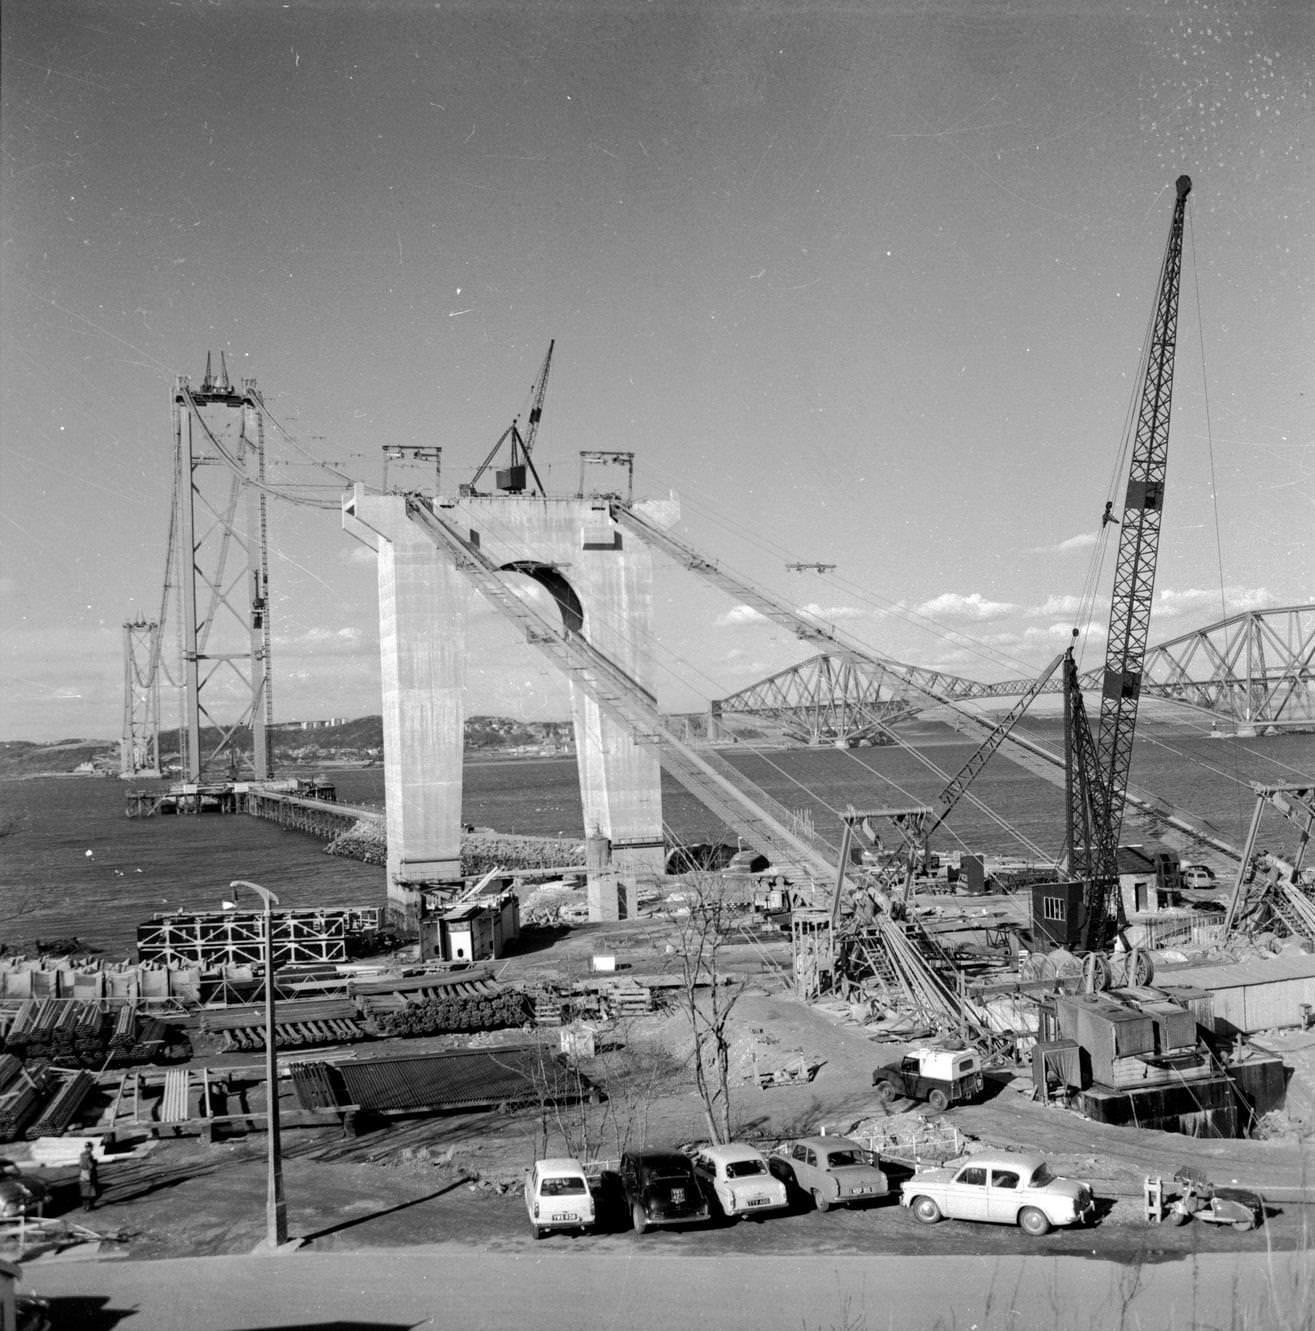 The end of the Forth Road Bridge in Scotland, where the suspension cables are anchored, 1962